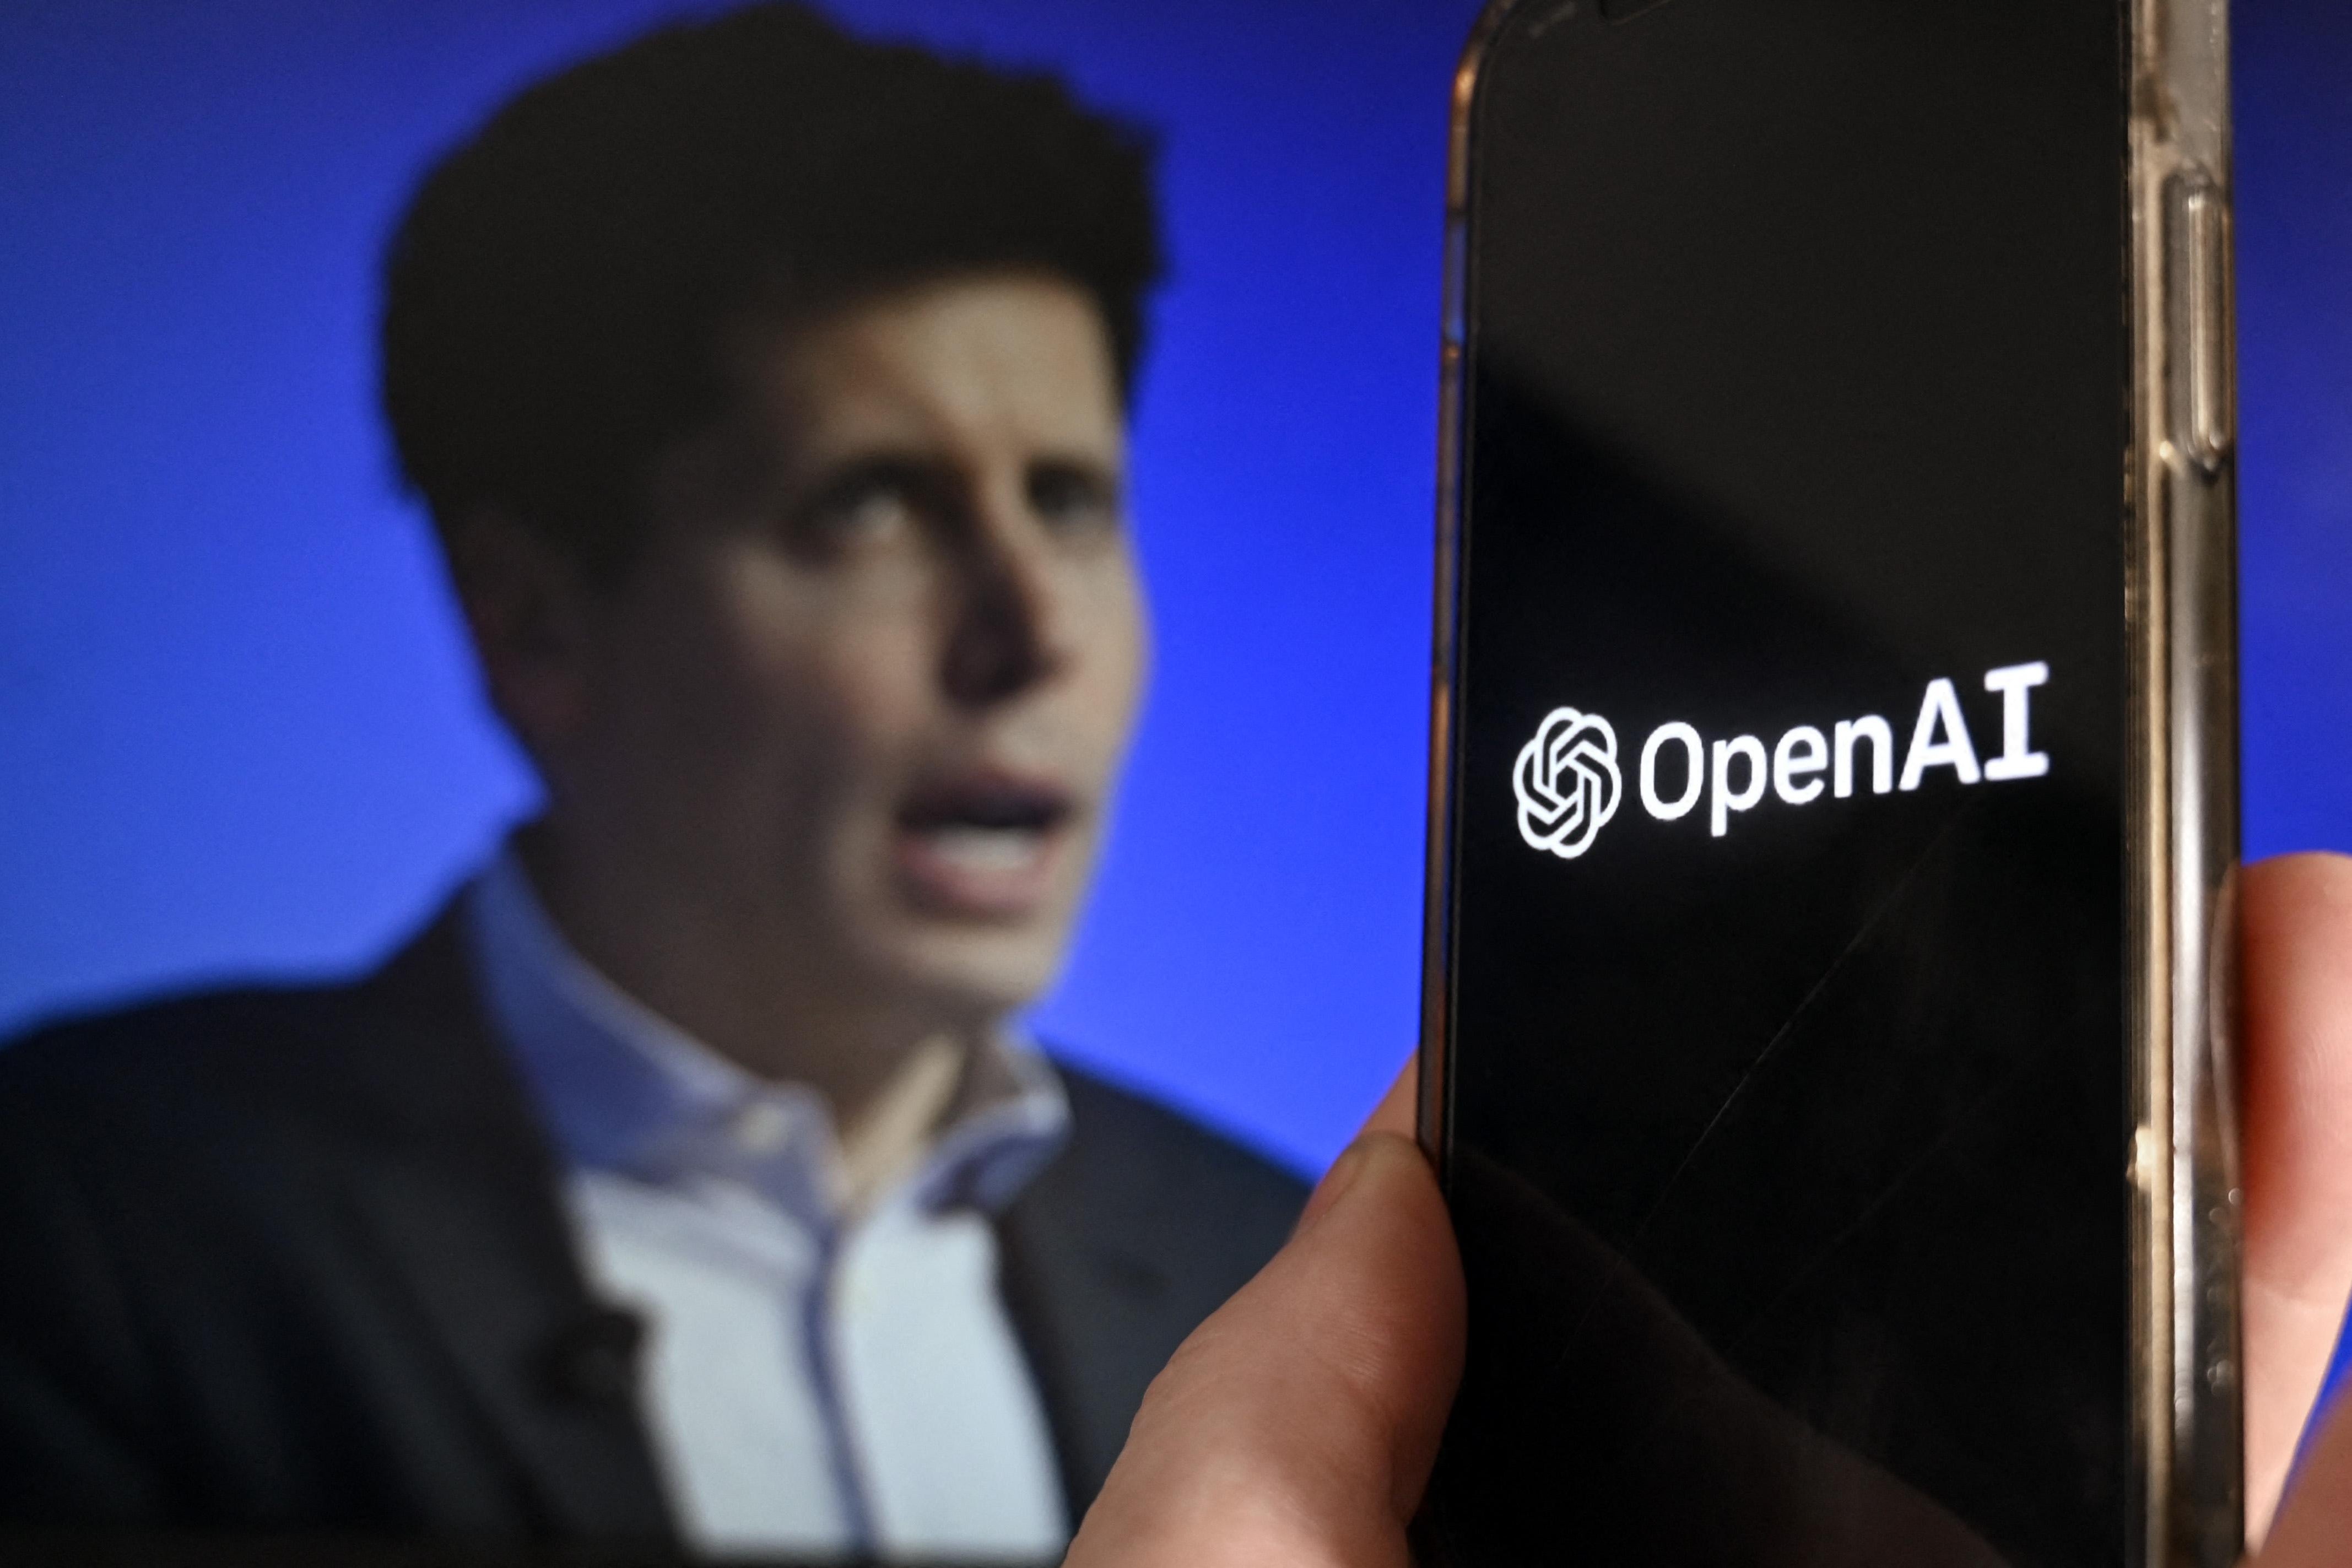 A smartphone displaying the OpenAI logo is held up in front of a background display of Sam Altman's face.